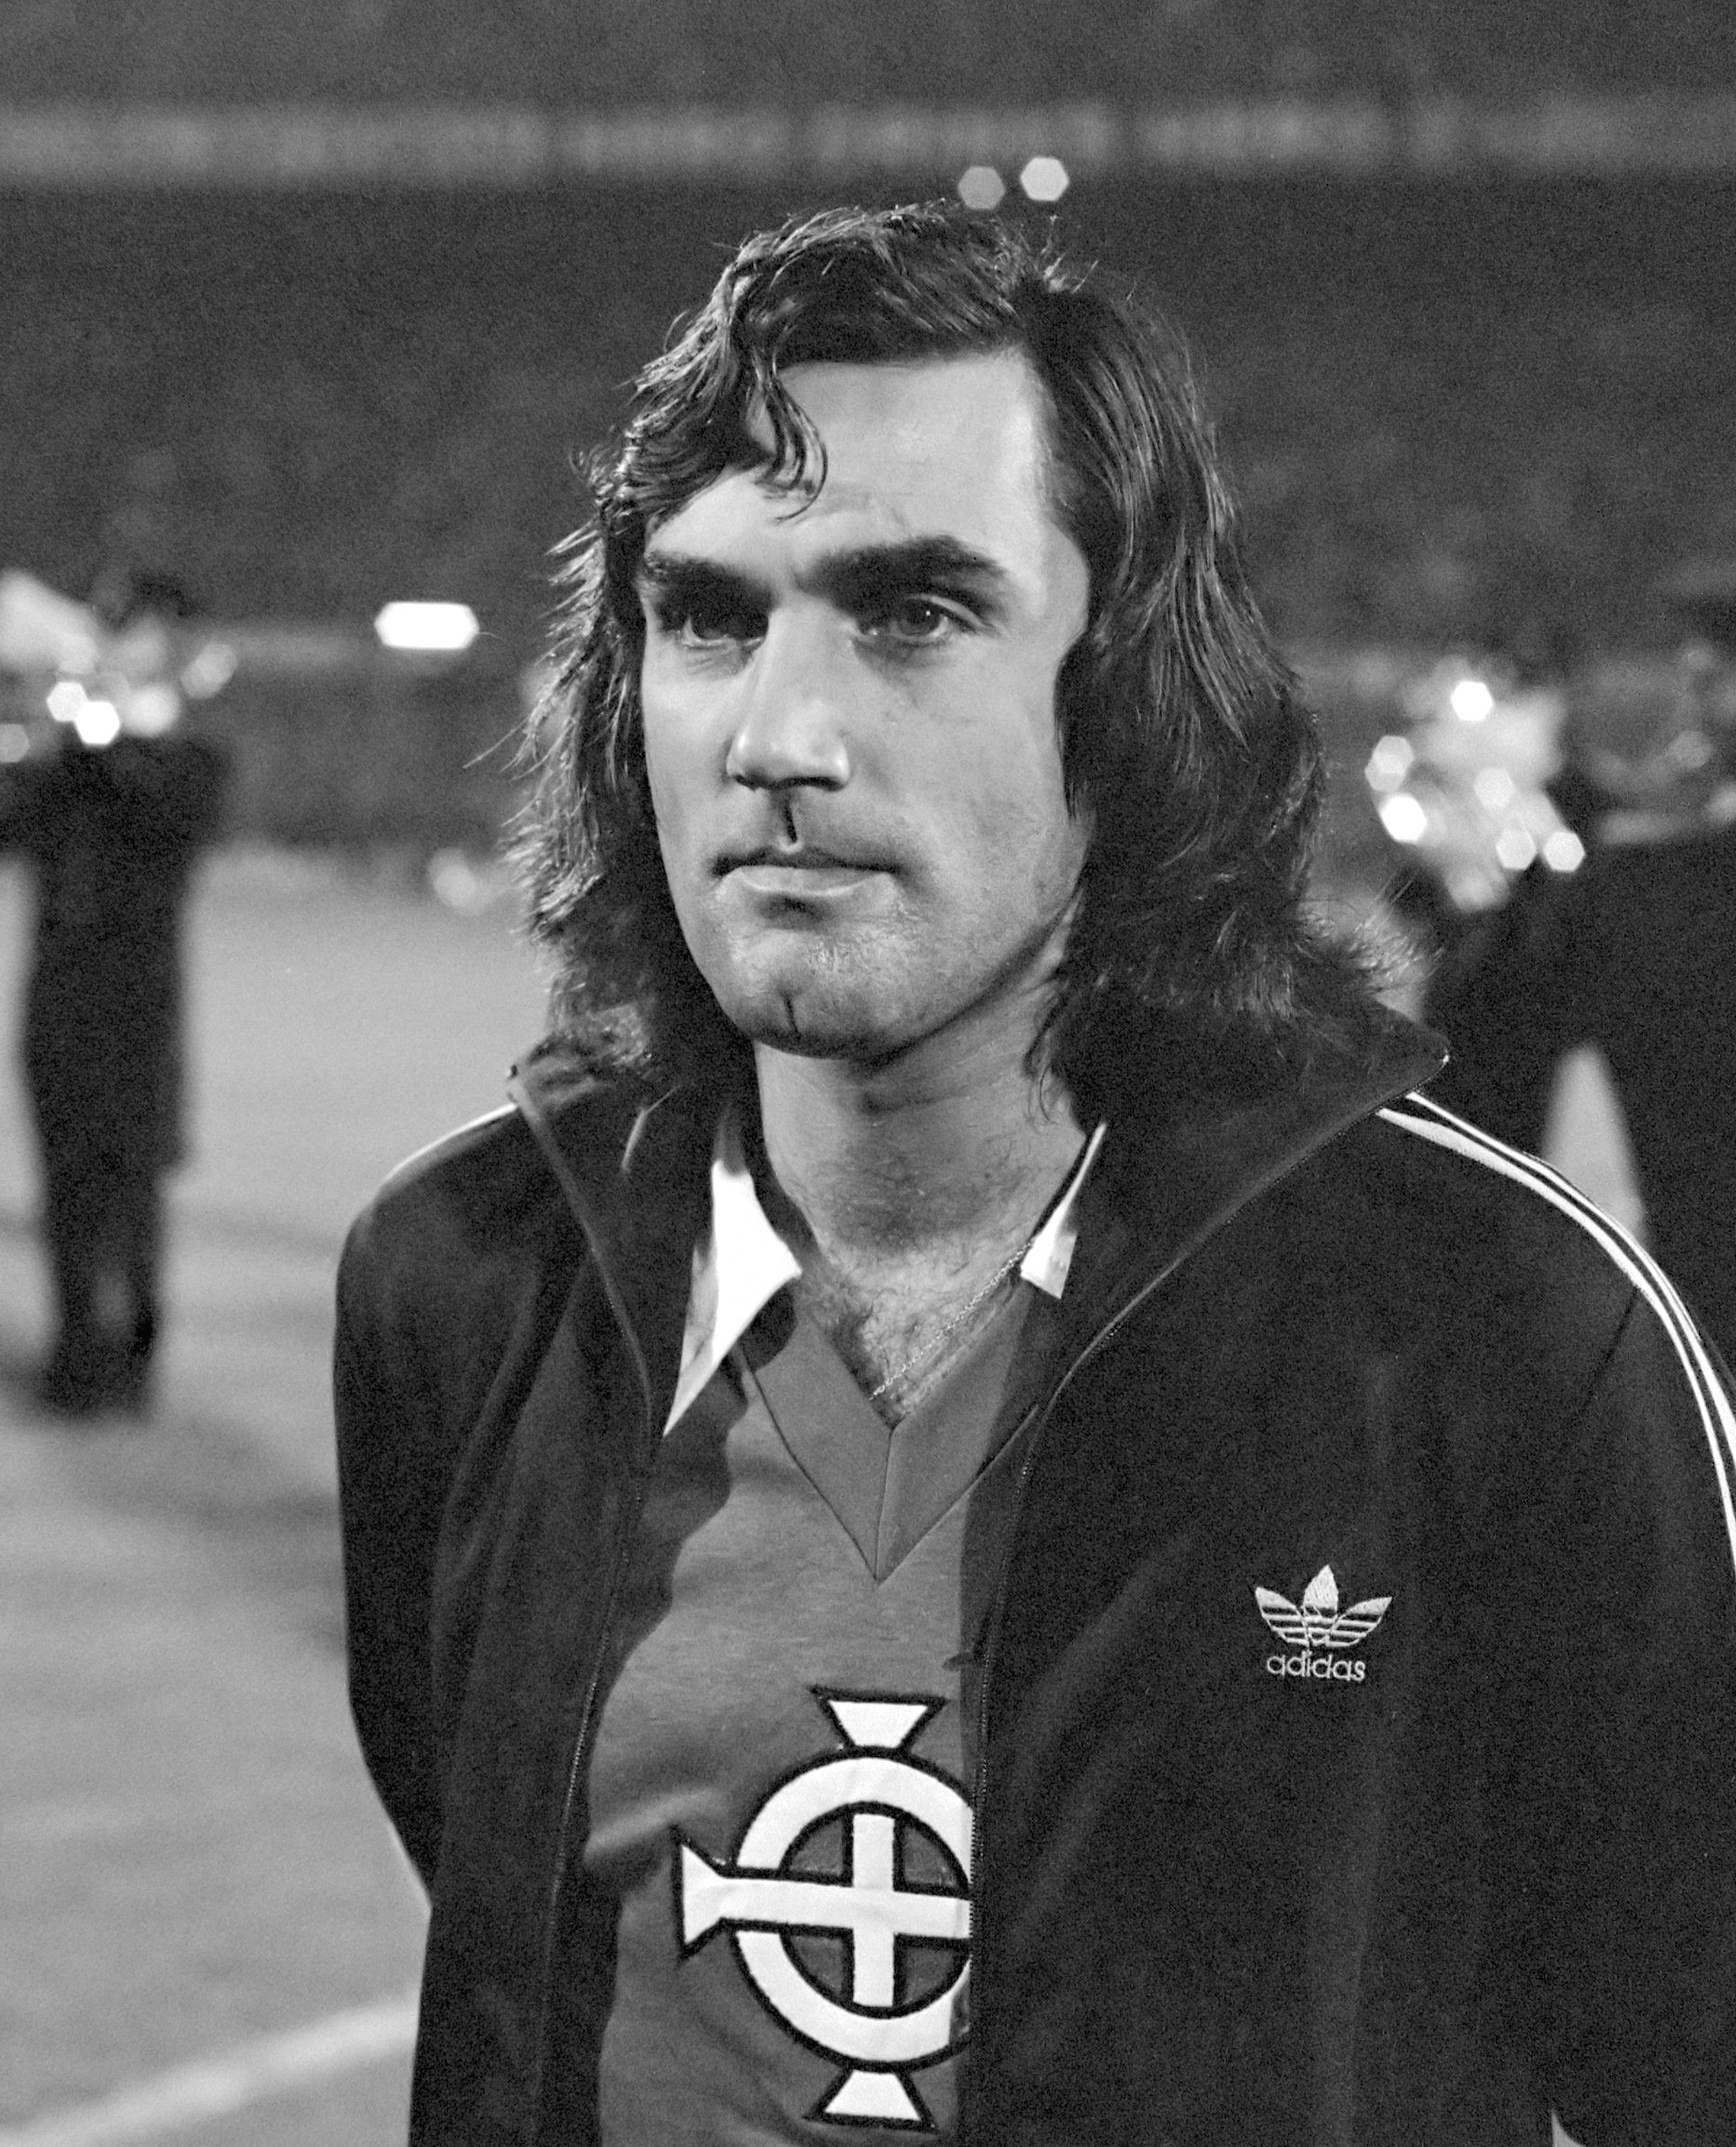 The Inspiring Story of George Best